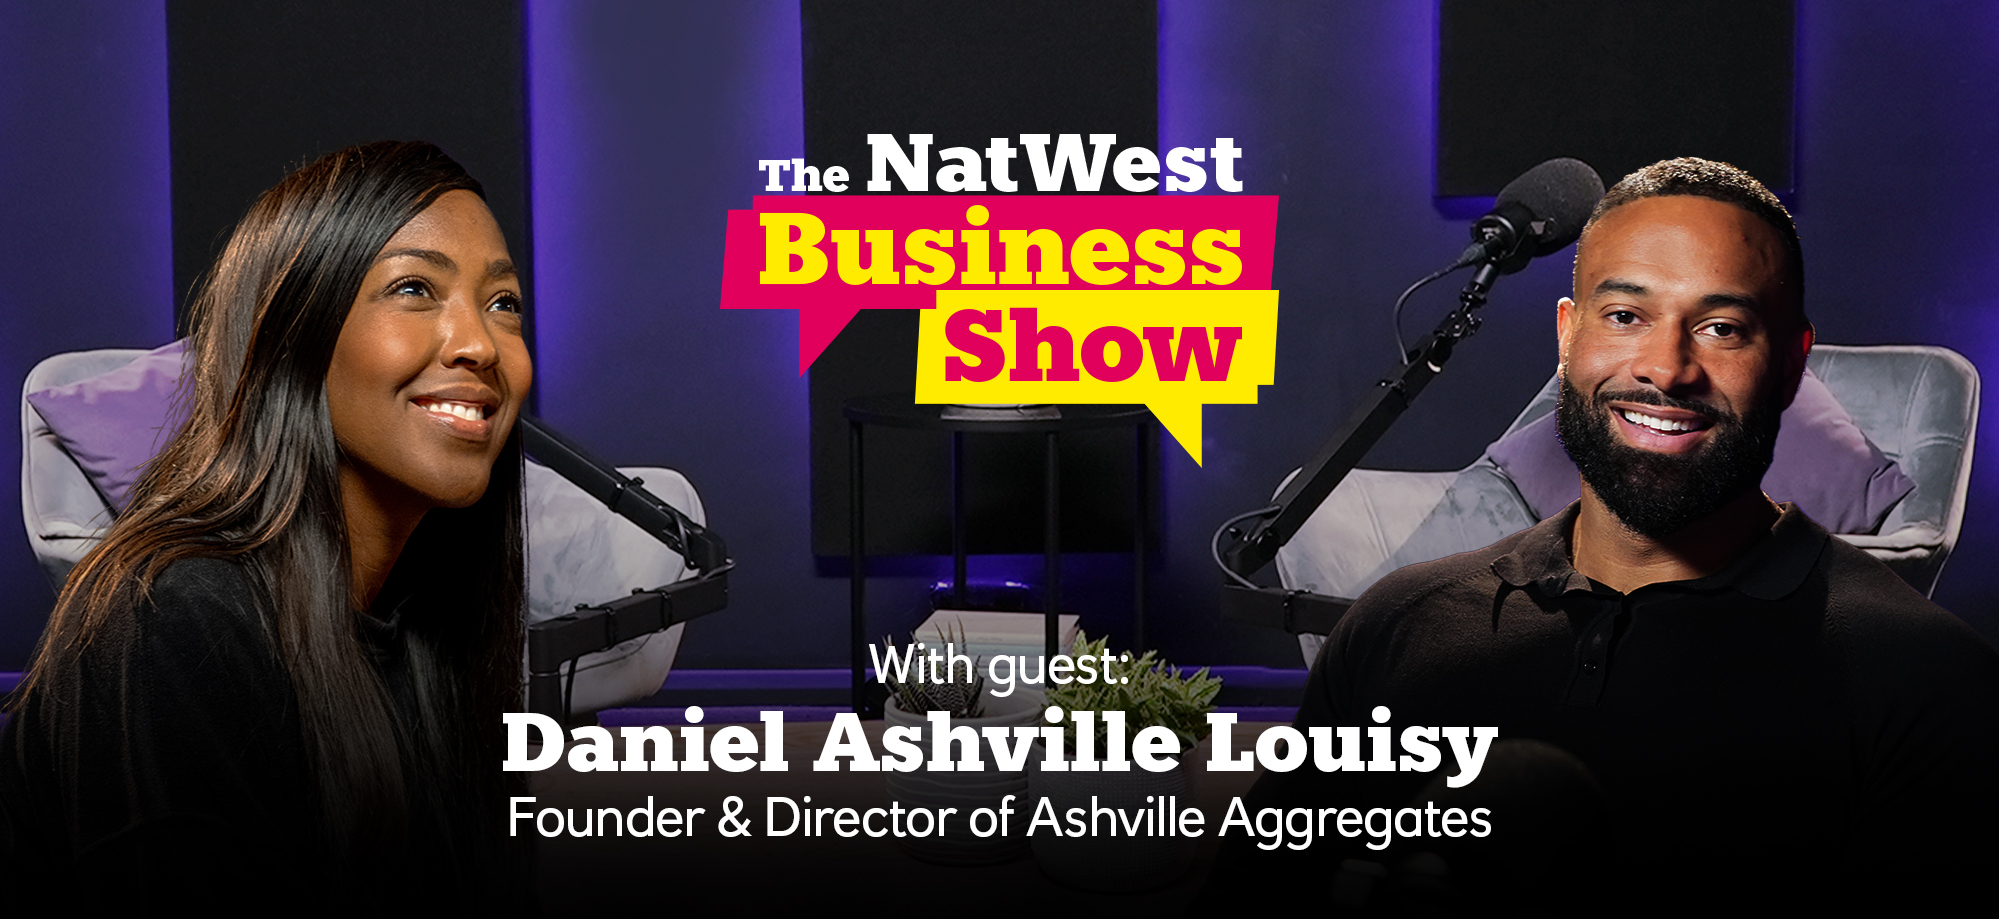 Photo of Daniel Ashville Louisy and Angellica Bell. with a graphic of the Business Show in the background